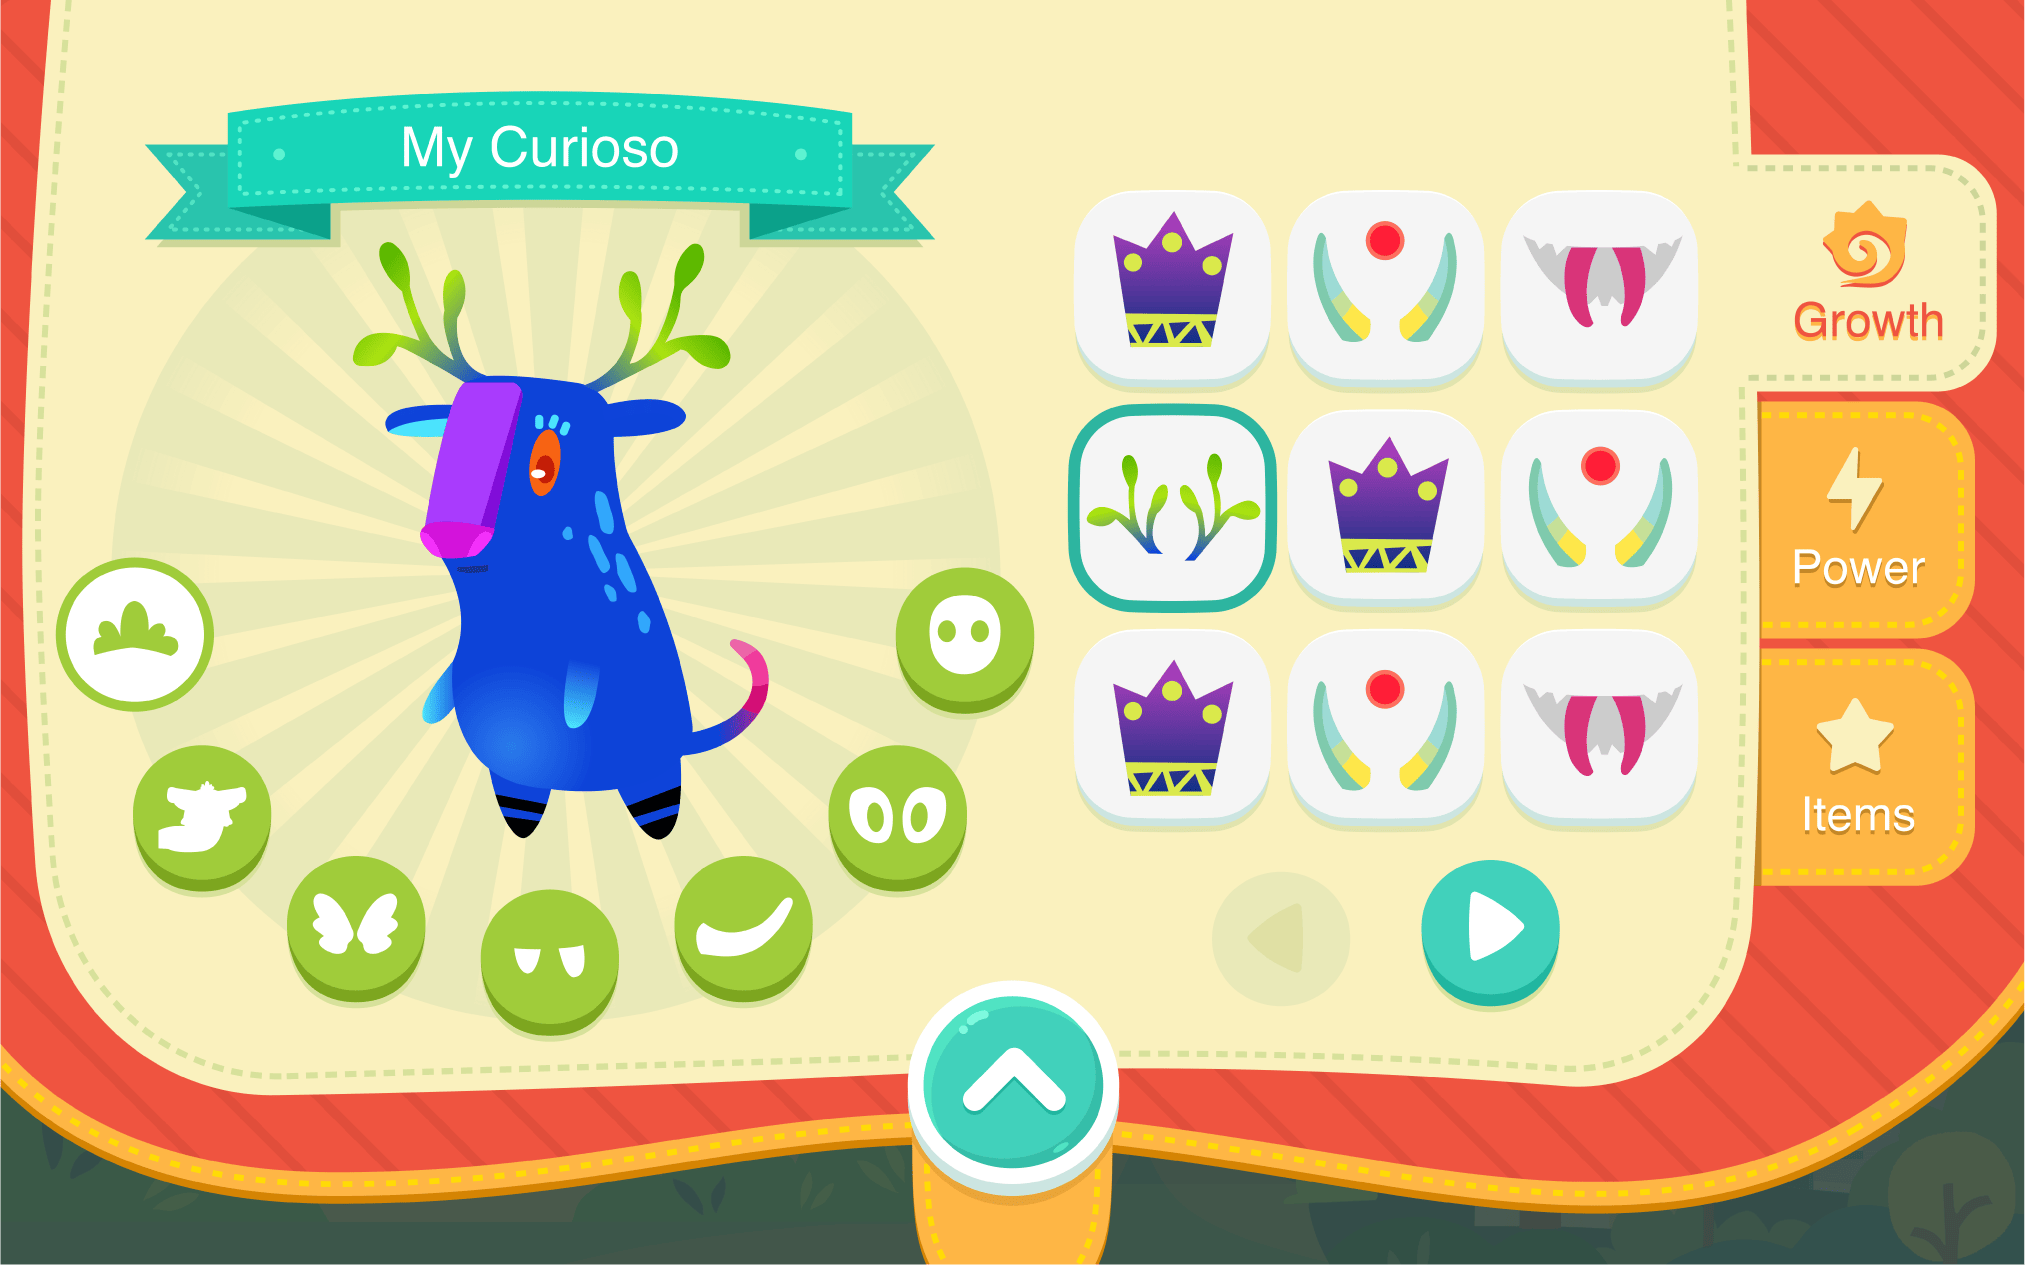 Colorful game interface showing a blue creature with antlers, named 